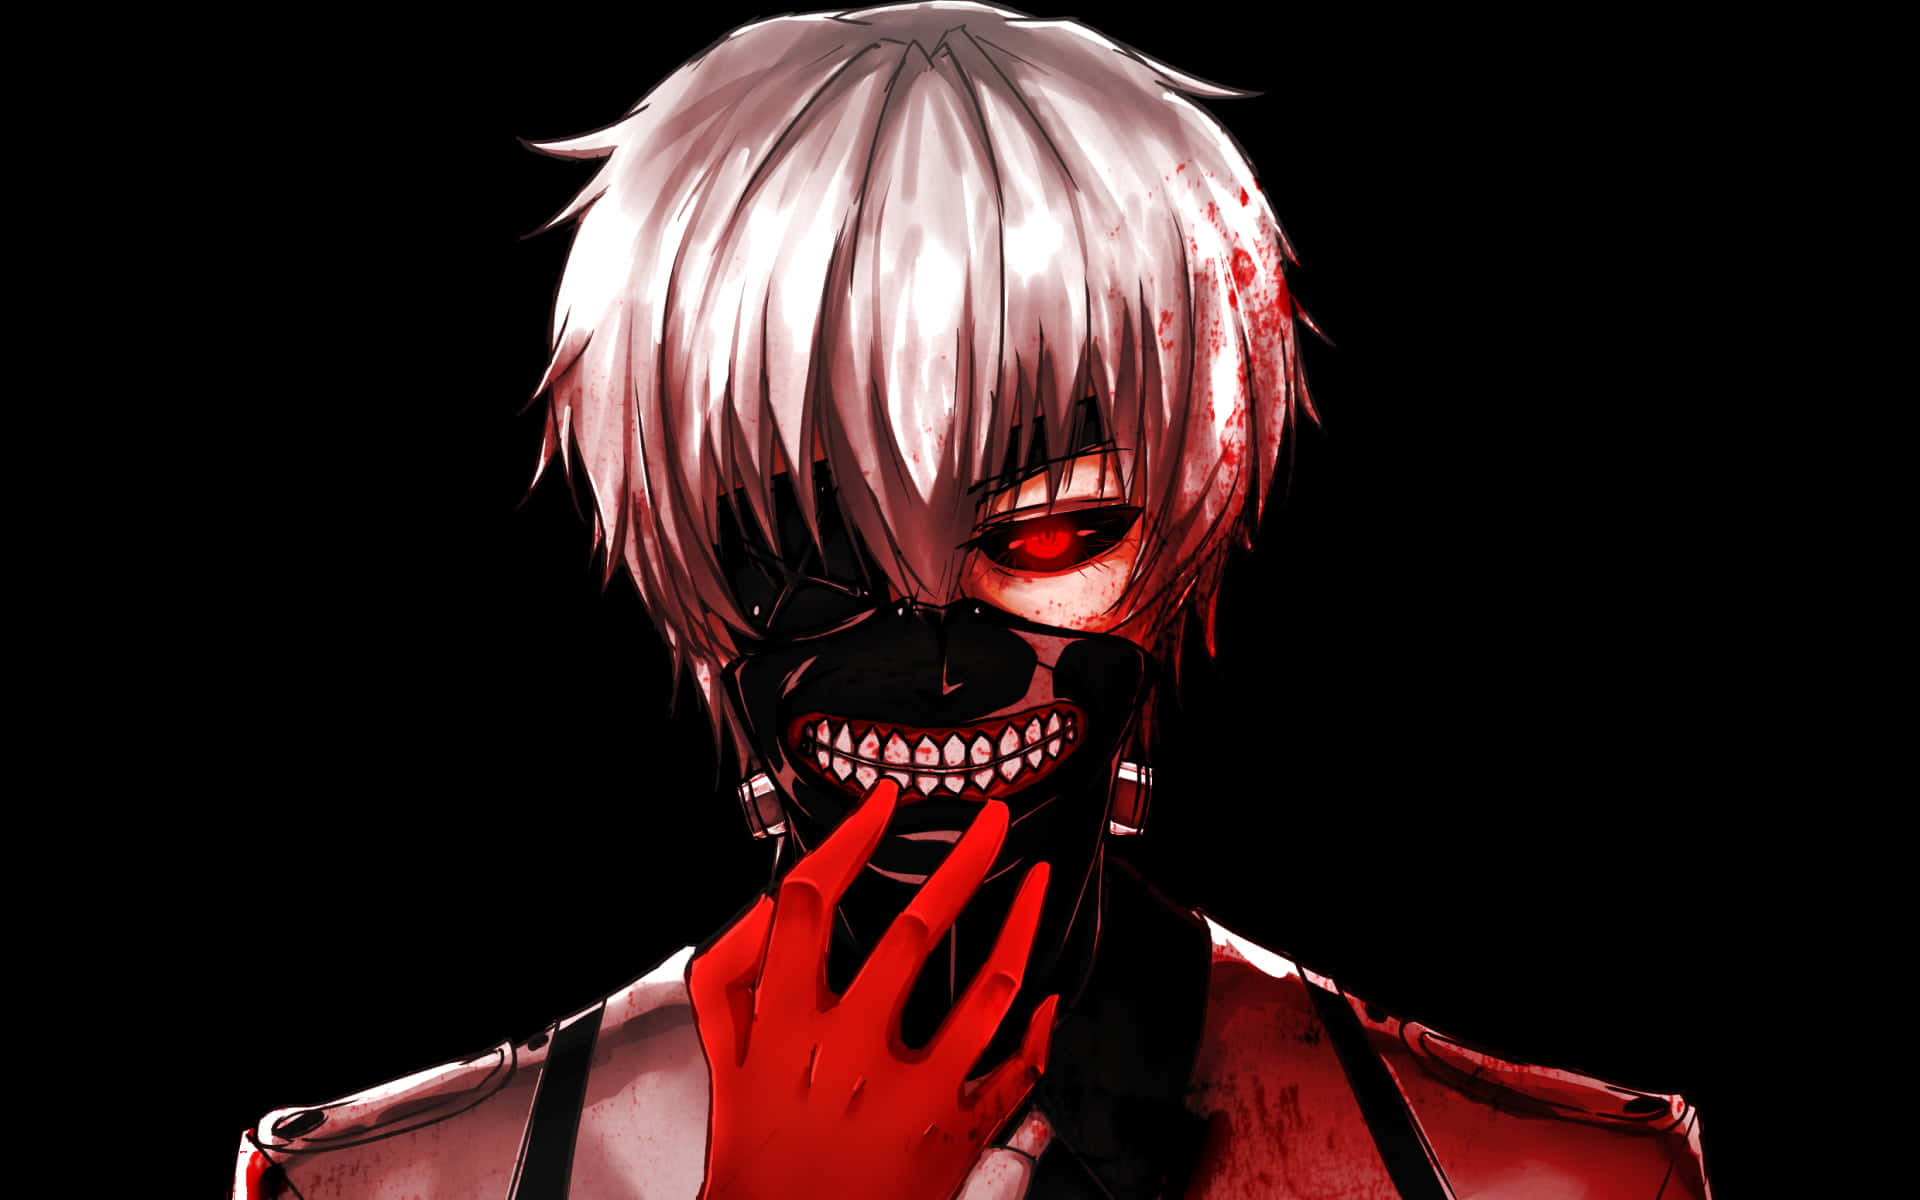 Kaneki's iconic mask evoking mystery, mysticism, and a sense of unknown danger. Wallpaper